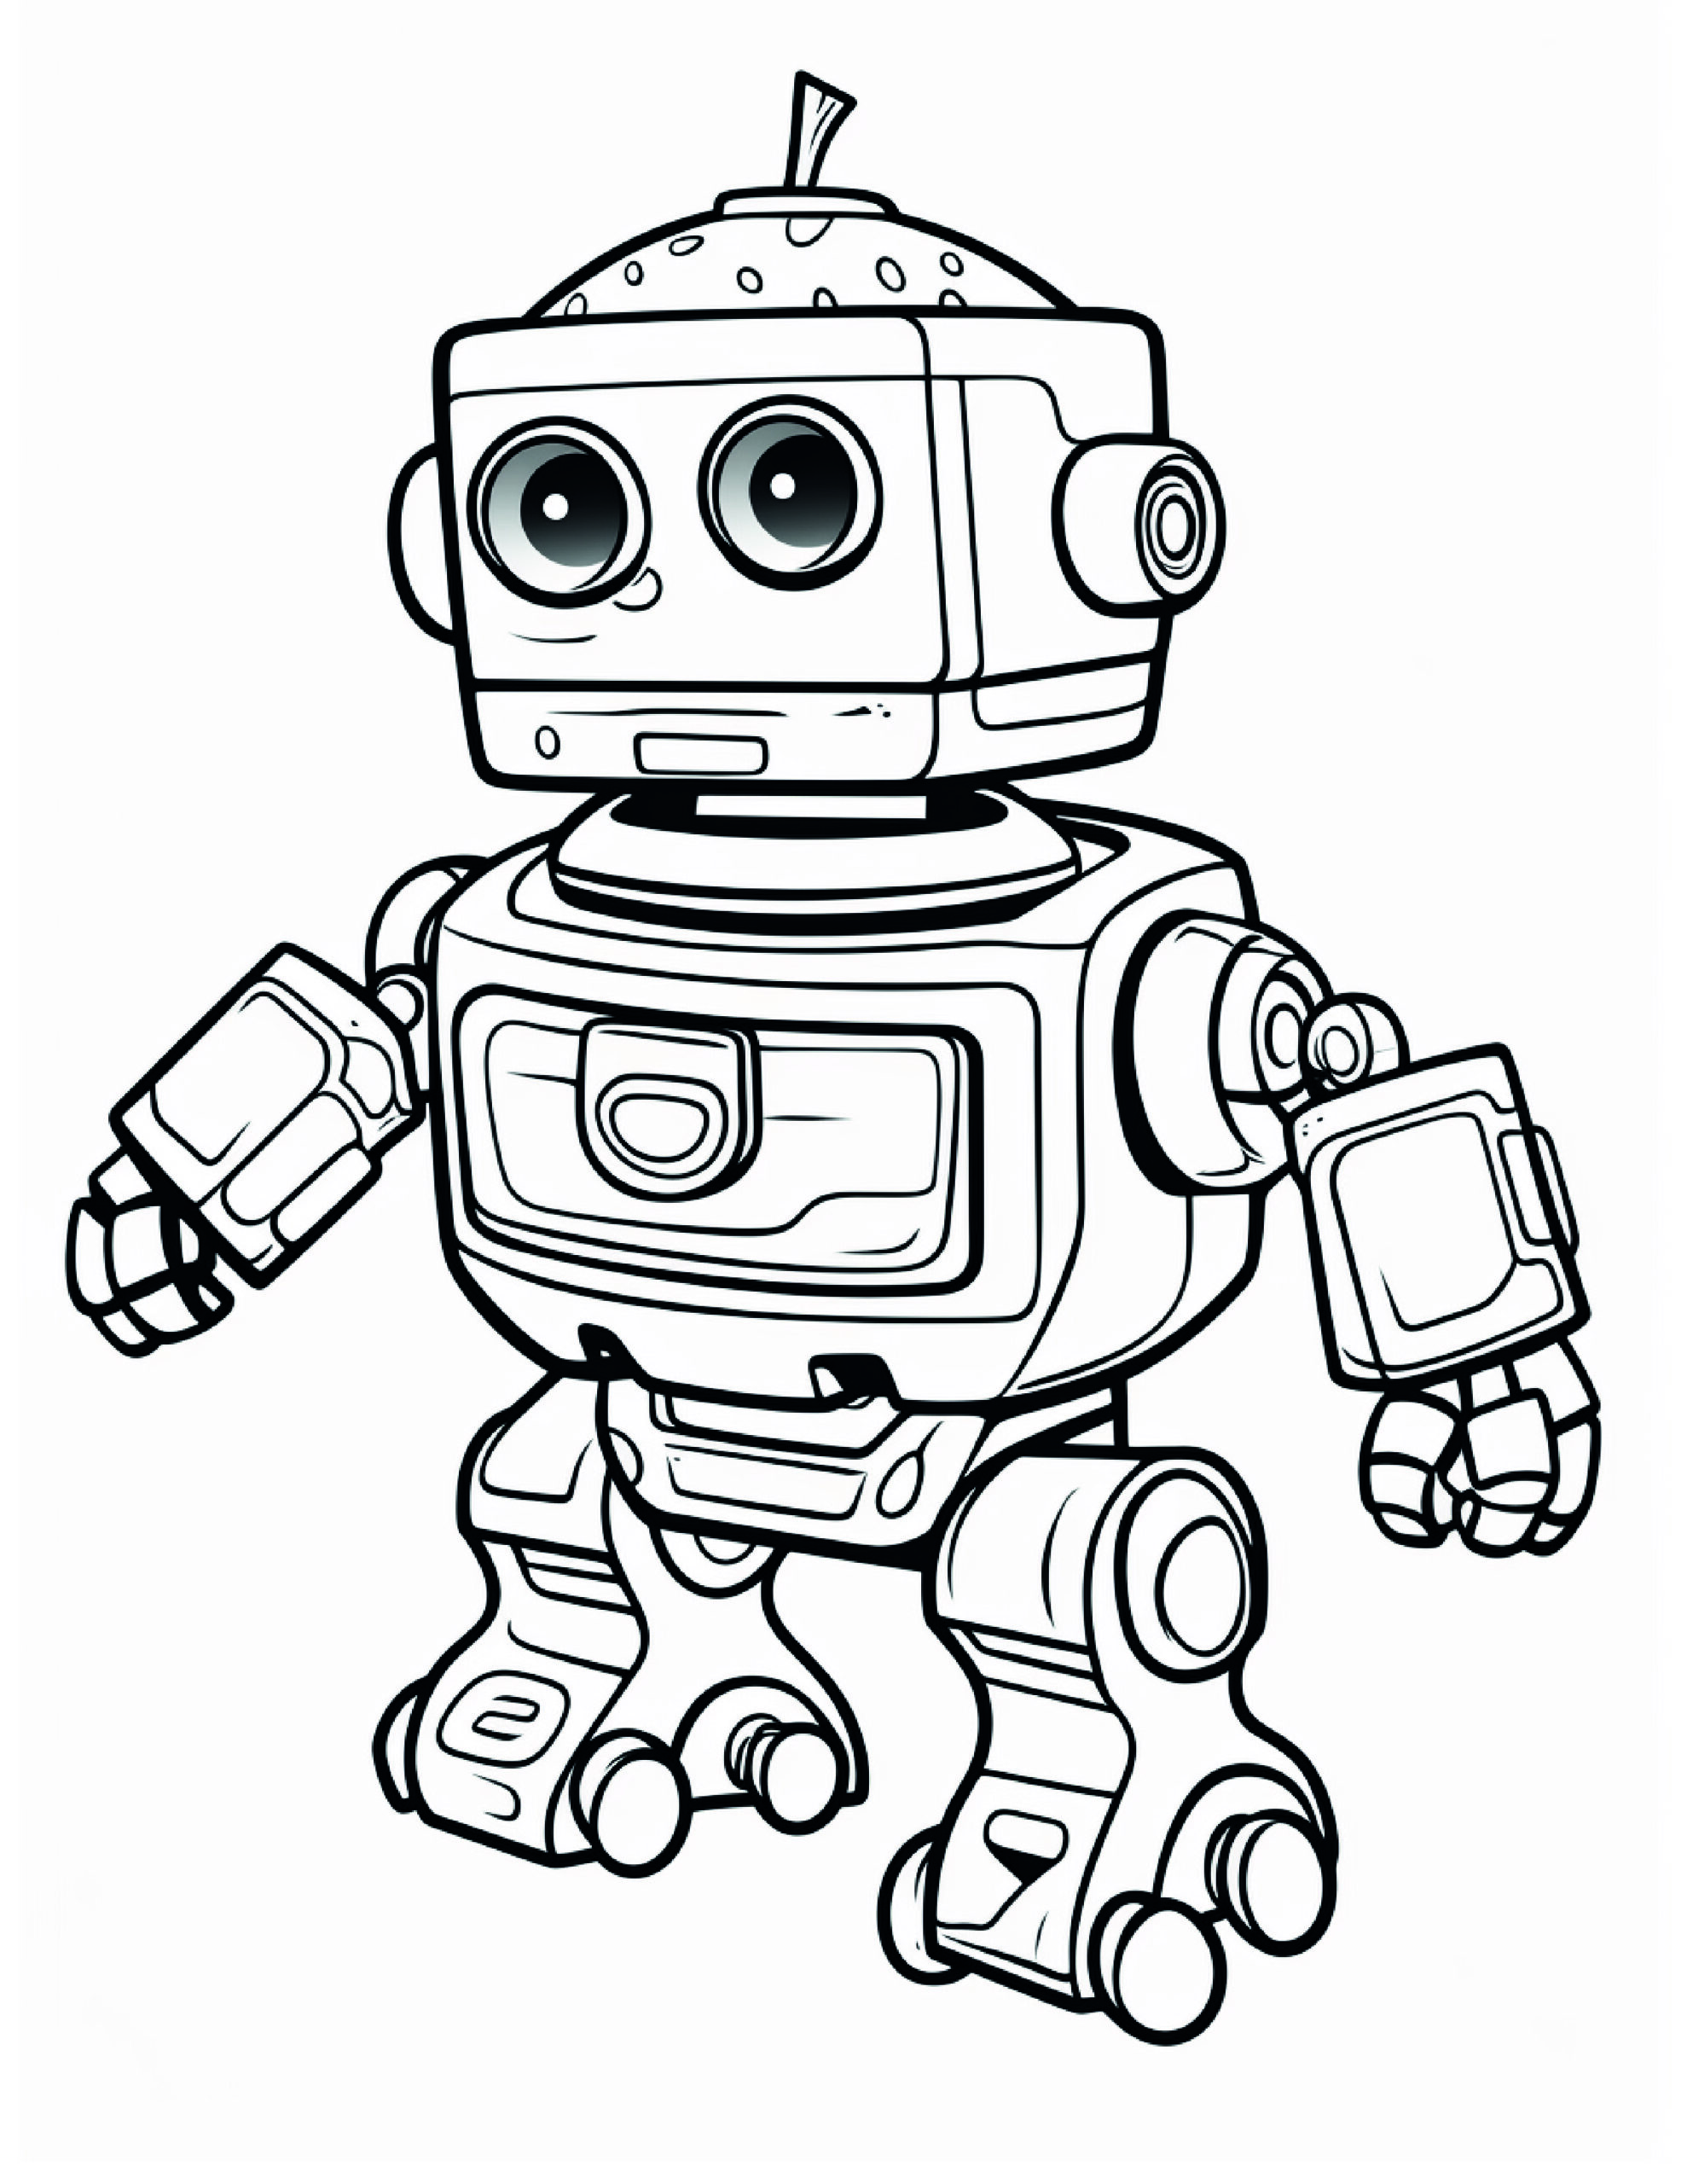 Robot Coloring Page 11 - A line drawing of a block robot. 